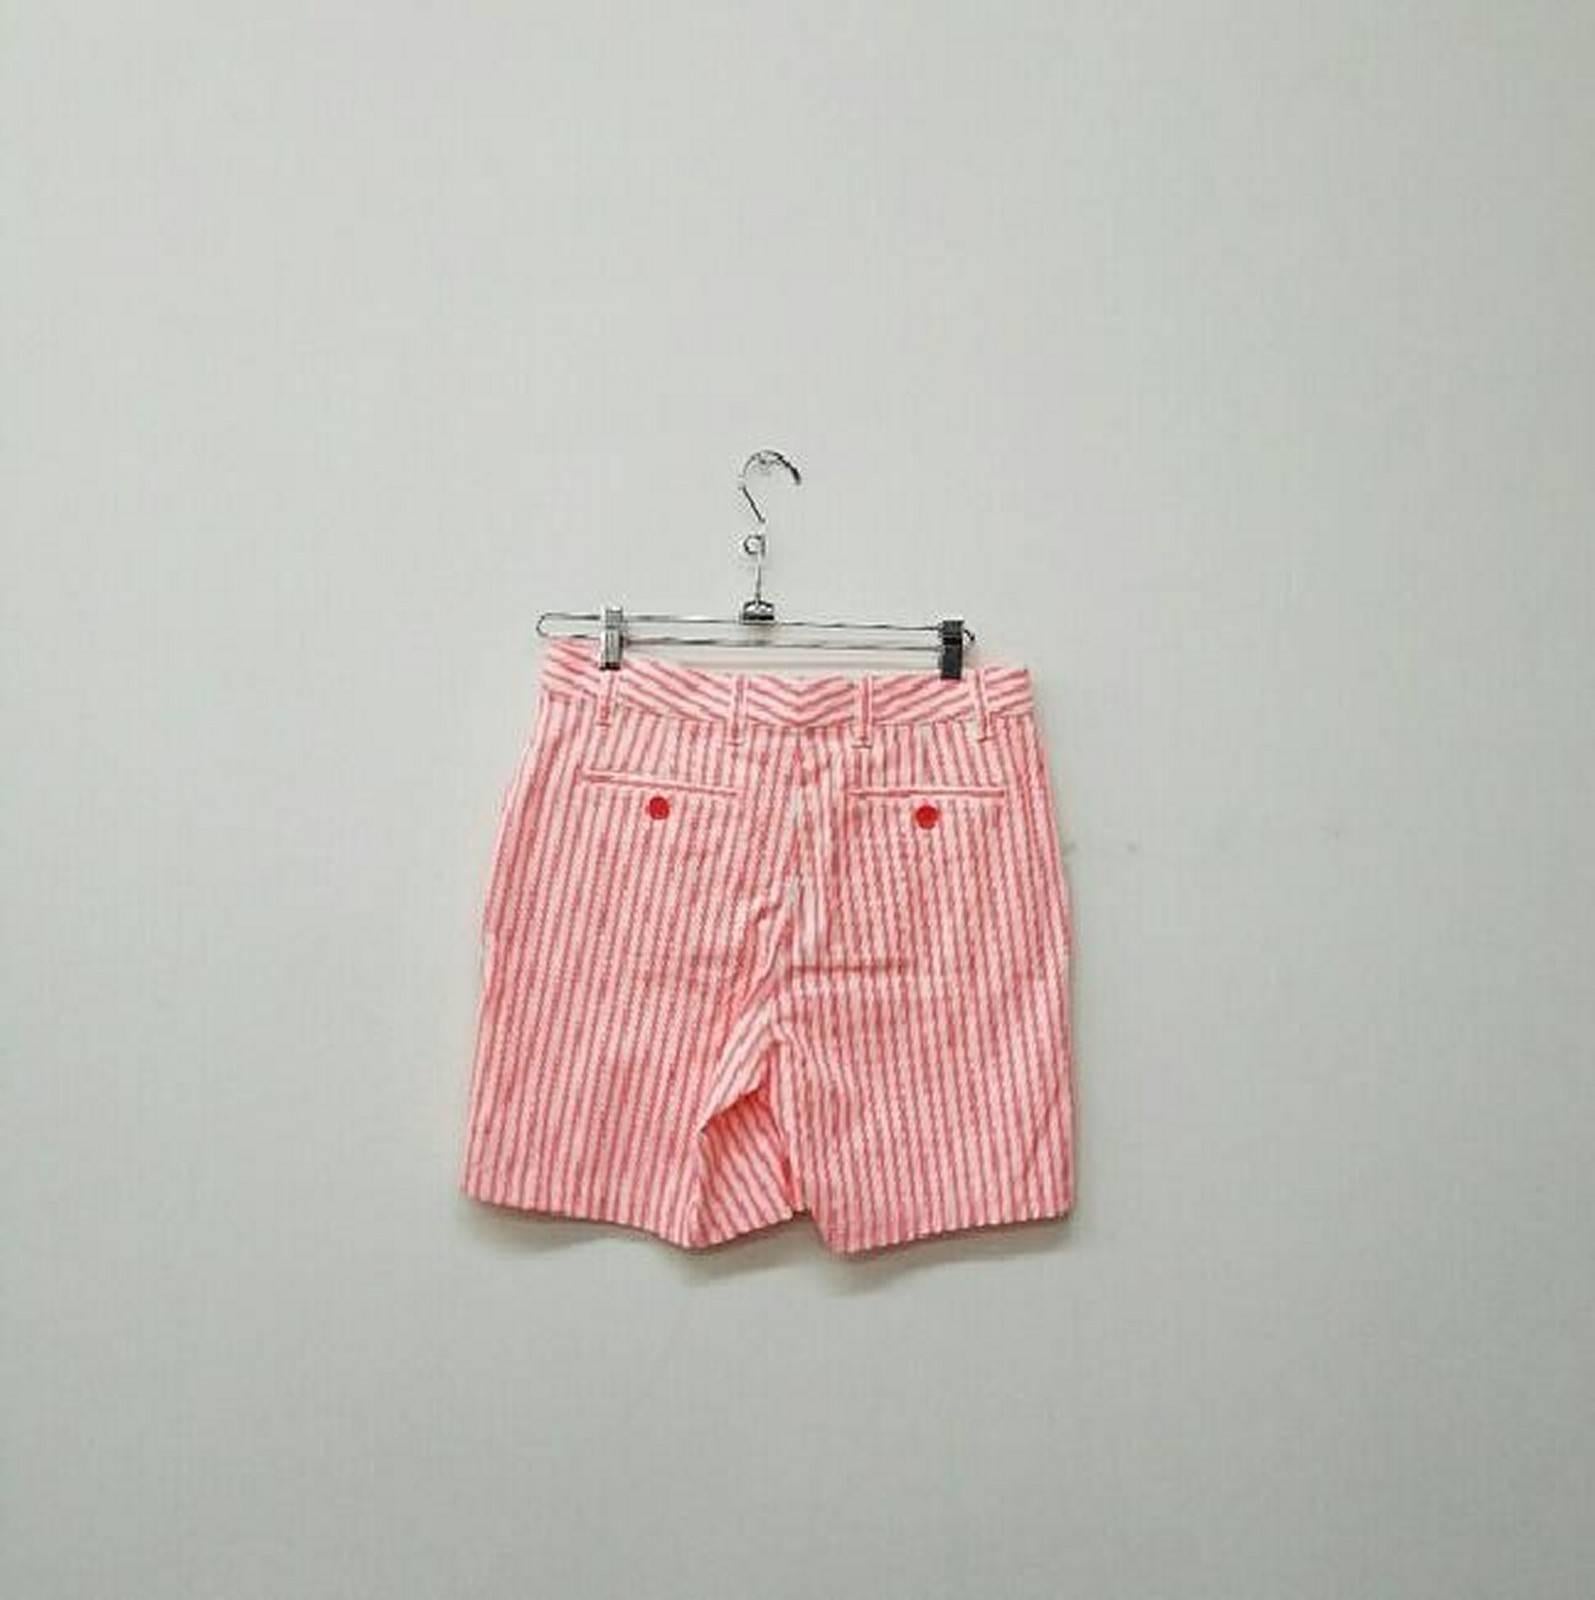 Marc by Marc Jacobs Striped Shorts

Electric Orange and white stripes. Brand new. Never used. Tags still attached.

Type:Shorts
Size:10 (M, 31)
Color:electric orange white
Brand:Marc by Marc Jacobs
Style/Collection:Marc by Marc Jacobs Striped Shorts